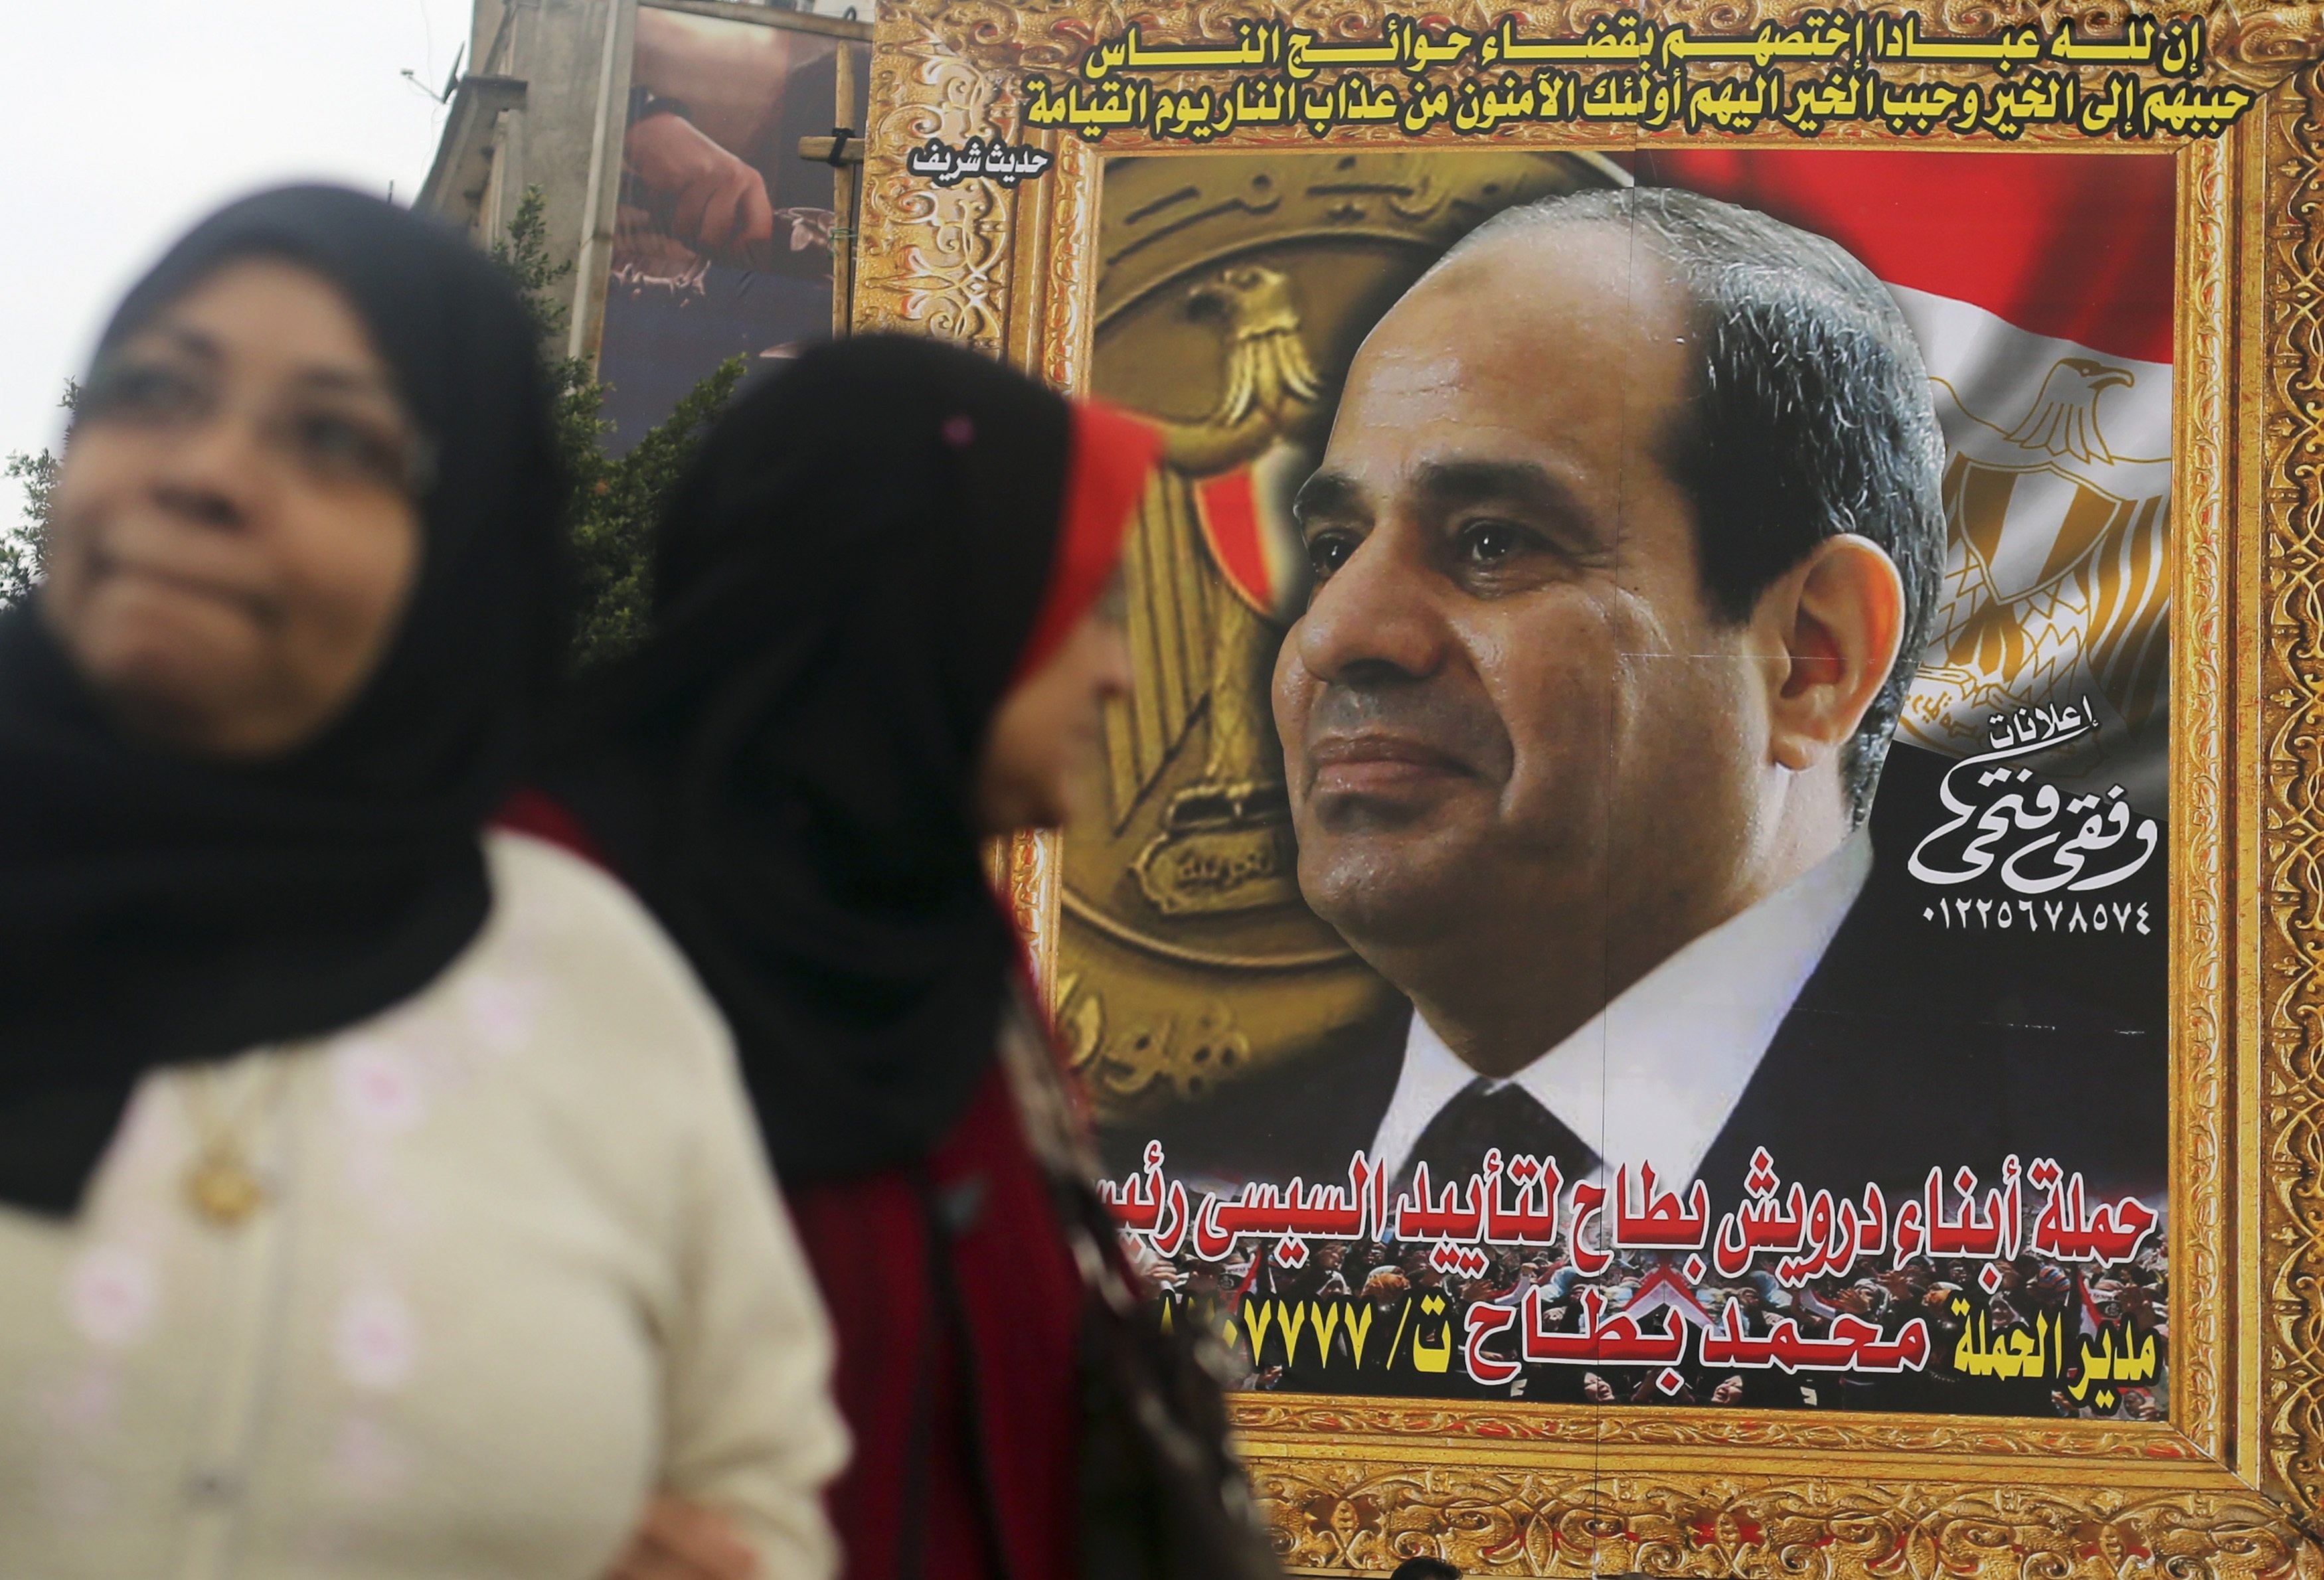 Women walk in front of a huge banner for Egypt's army chief, Field Marshal Abdel Fattah al-Sisi in downtown Cairo, March 13, 2014. (Amr Abdallah Dalsh—Reuters)